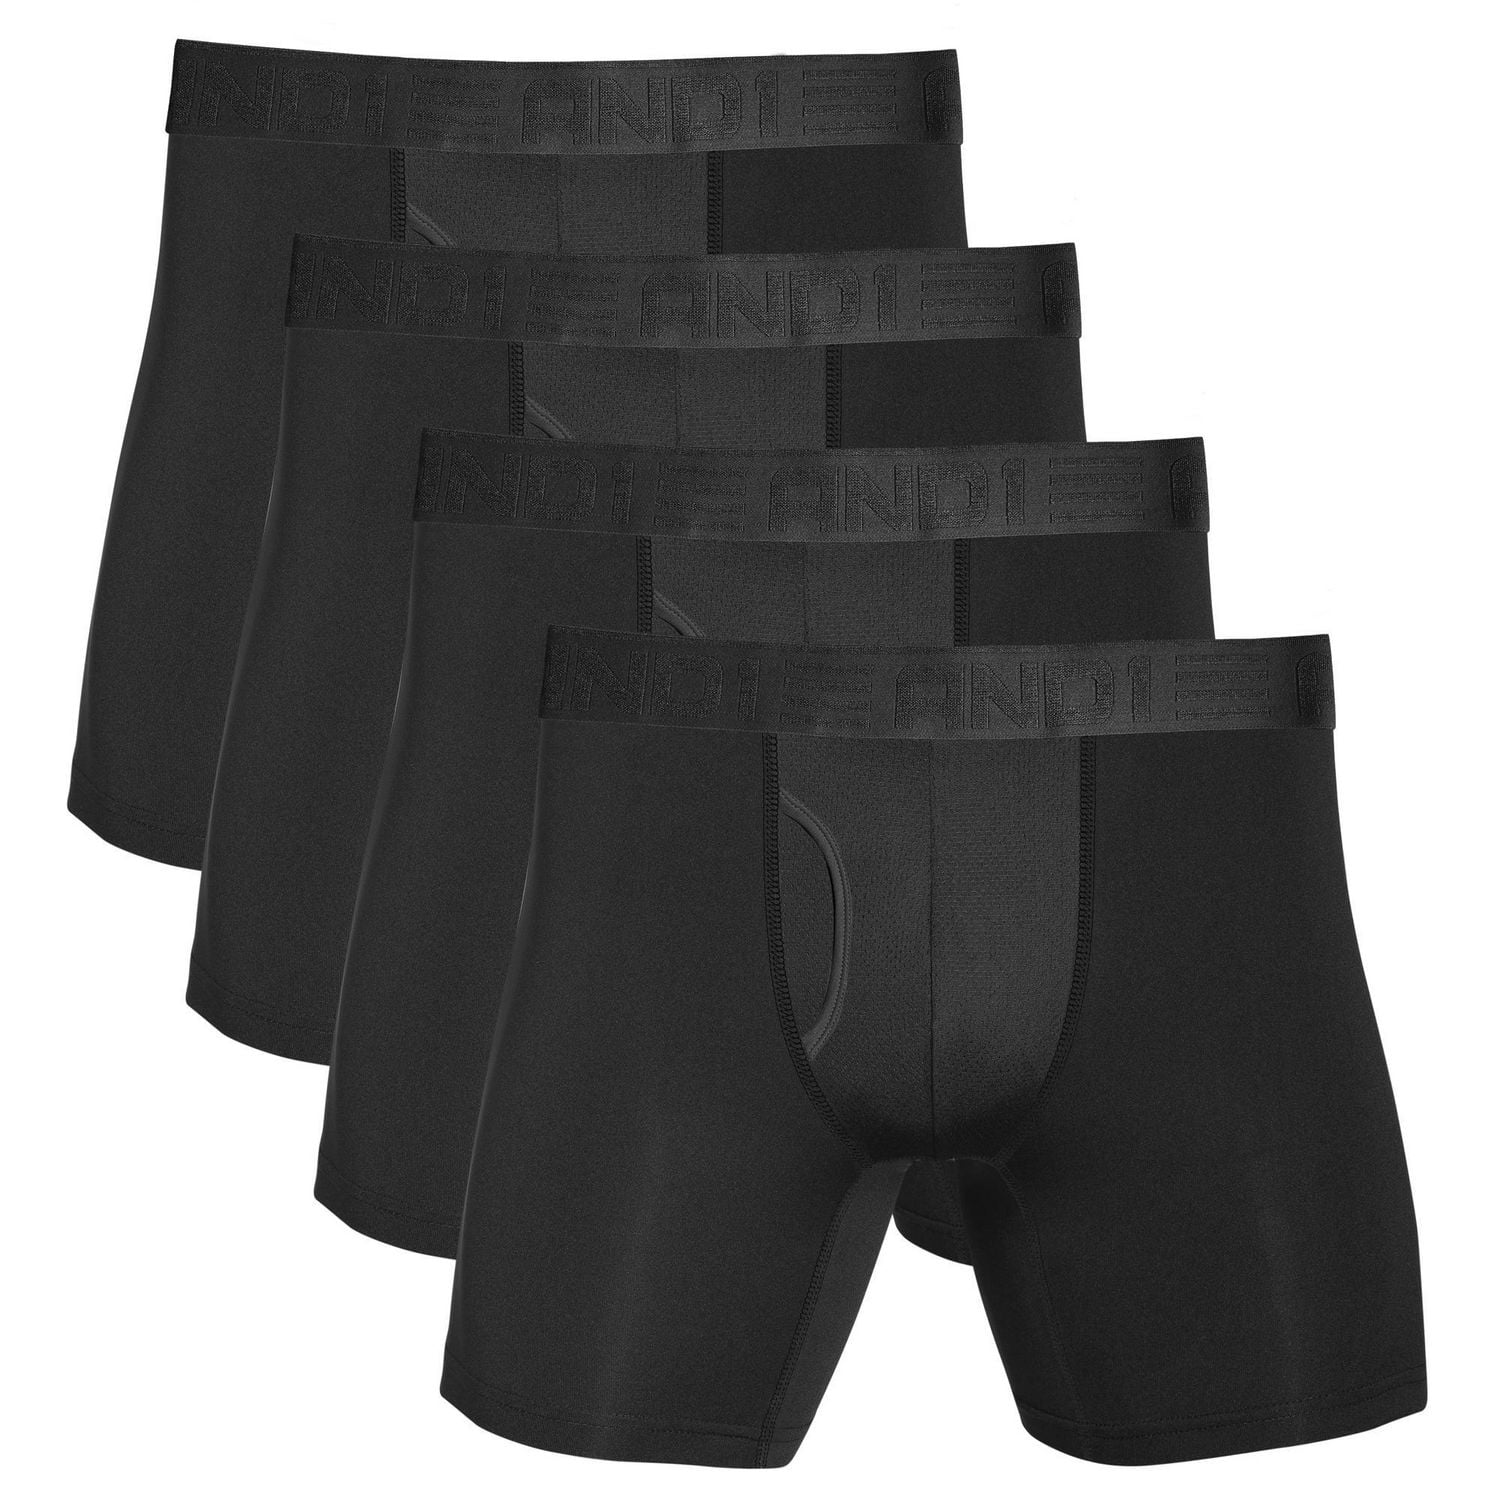 AND1 4 Pack Performance Boxer Briefs With Fly Pouch